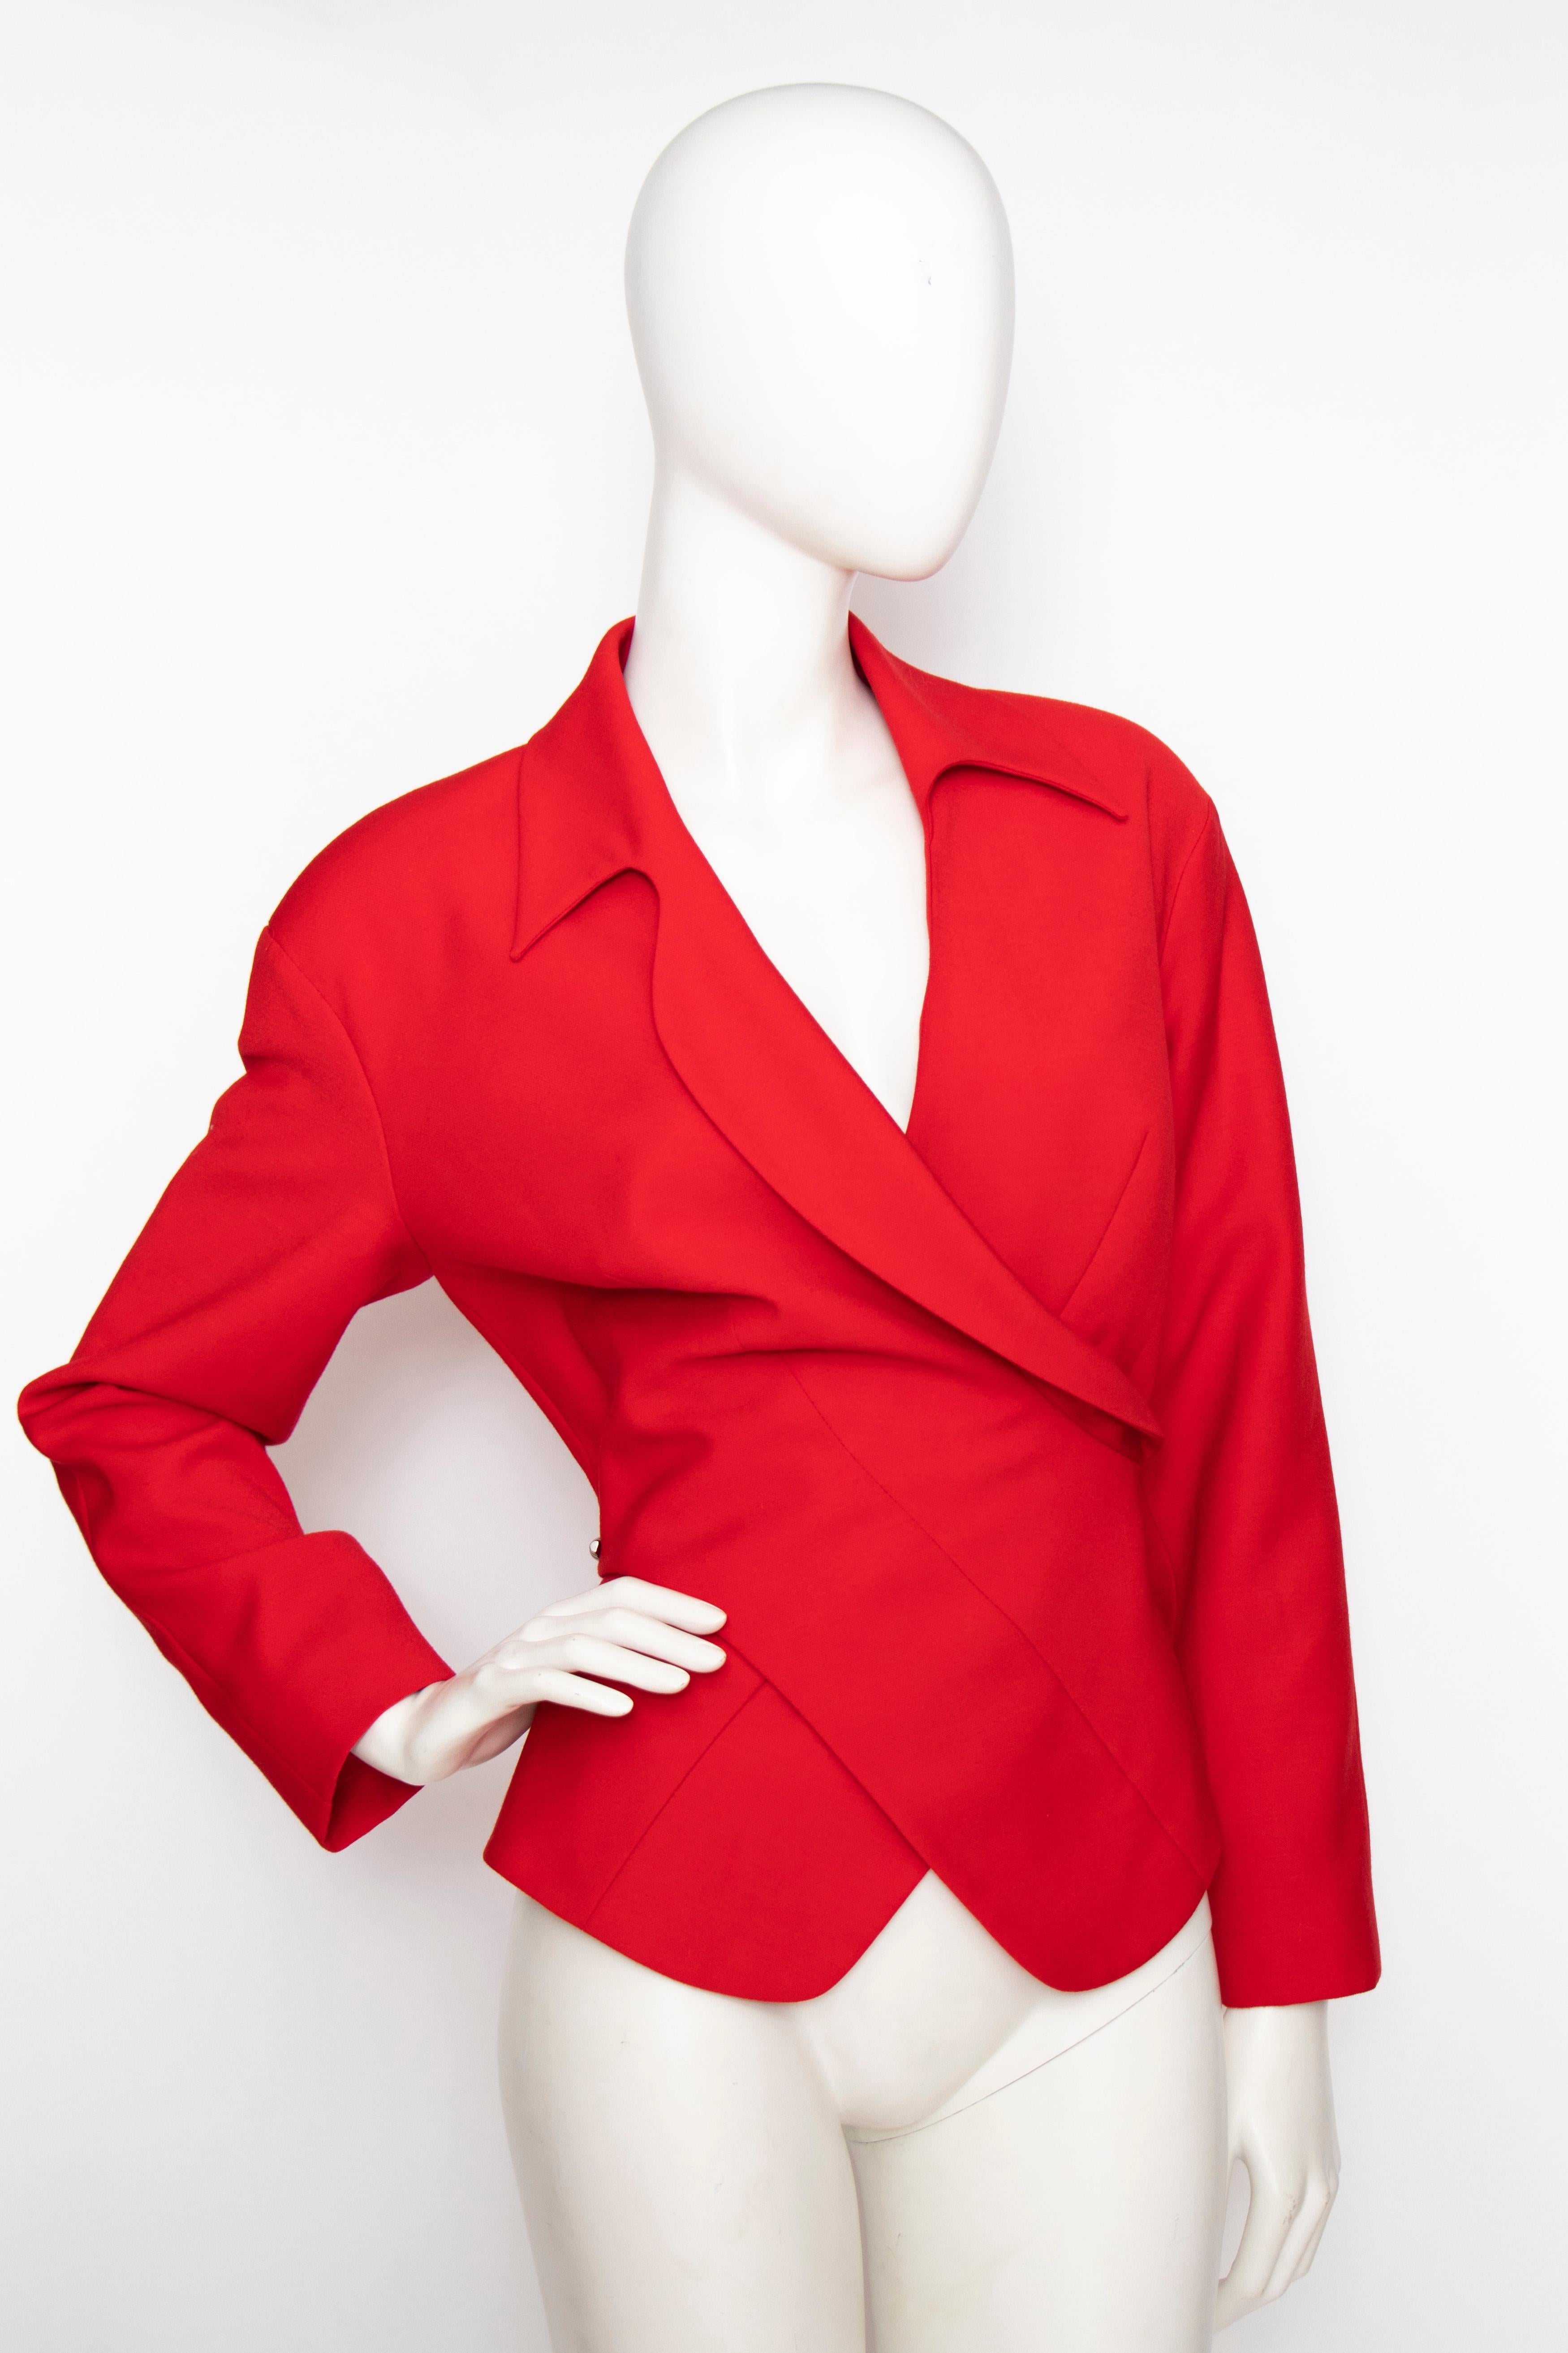 A 1980s vintage Thierry Mugler bright red wool blazer with a fitted waist and iconic exaggerated shoulders. The stunning blazer has a wrap closure, rounded lapels and is held together by chrome toned 